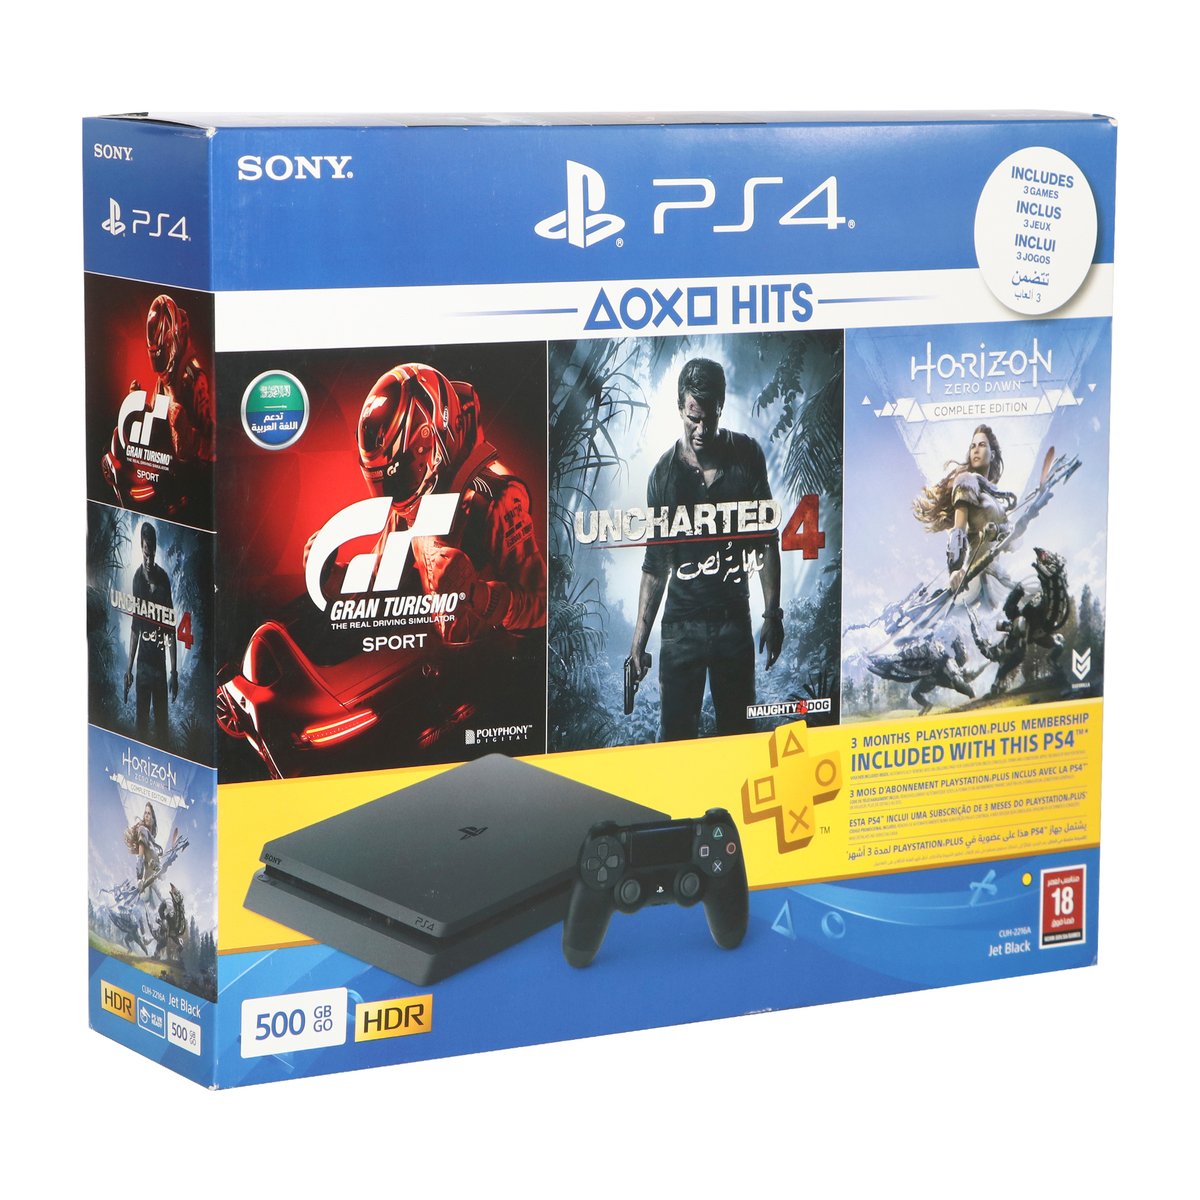 Sony PlayStation4 500GB+Horizon Complete Edition+GT Spoprt+Uncharted4+PS Plus 90 Days Subscription